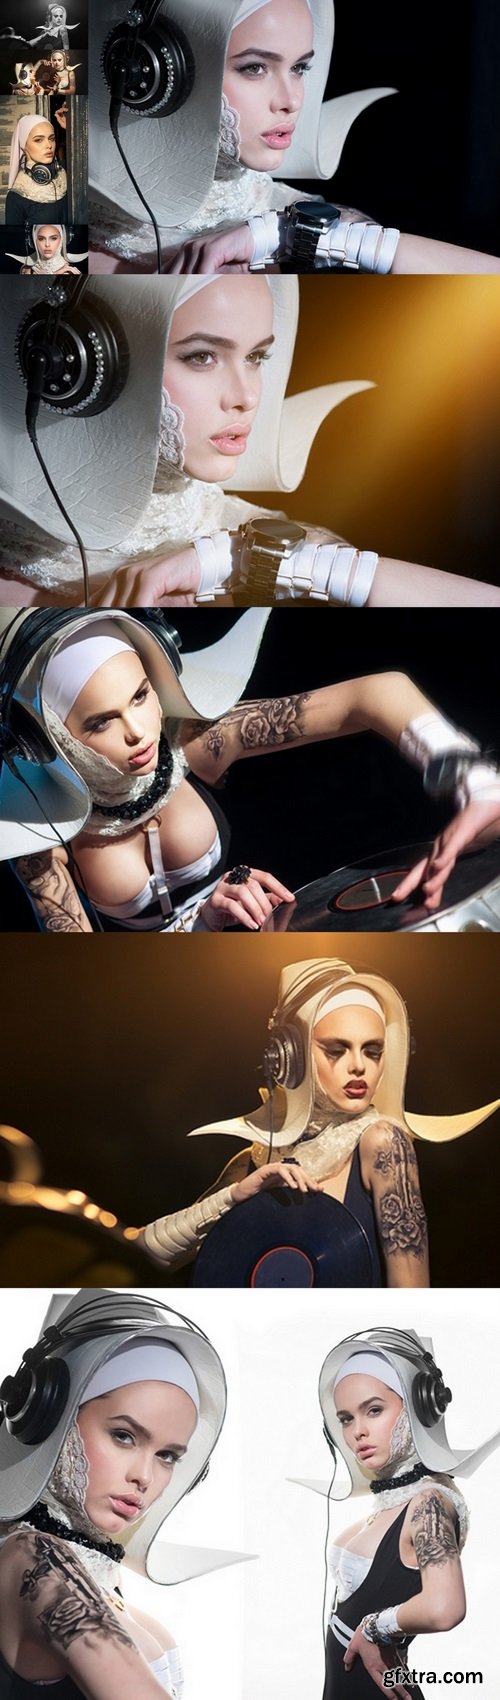 The girl - a nun in the form of a DJ